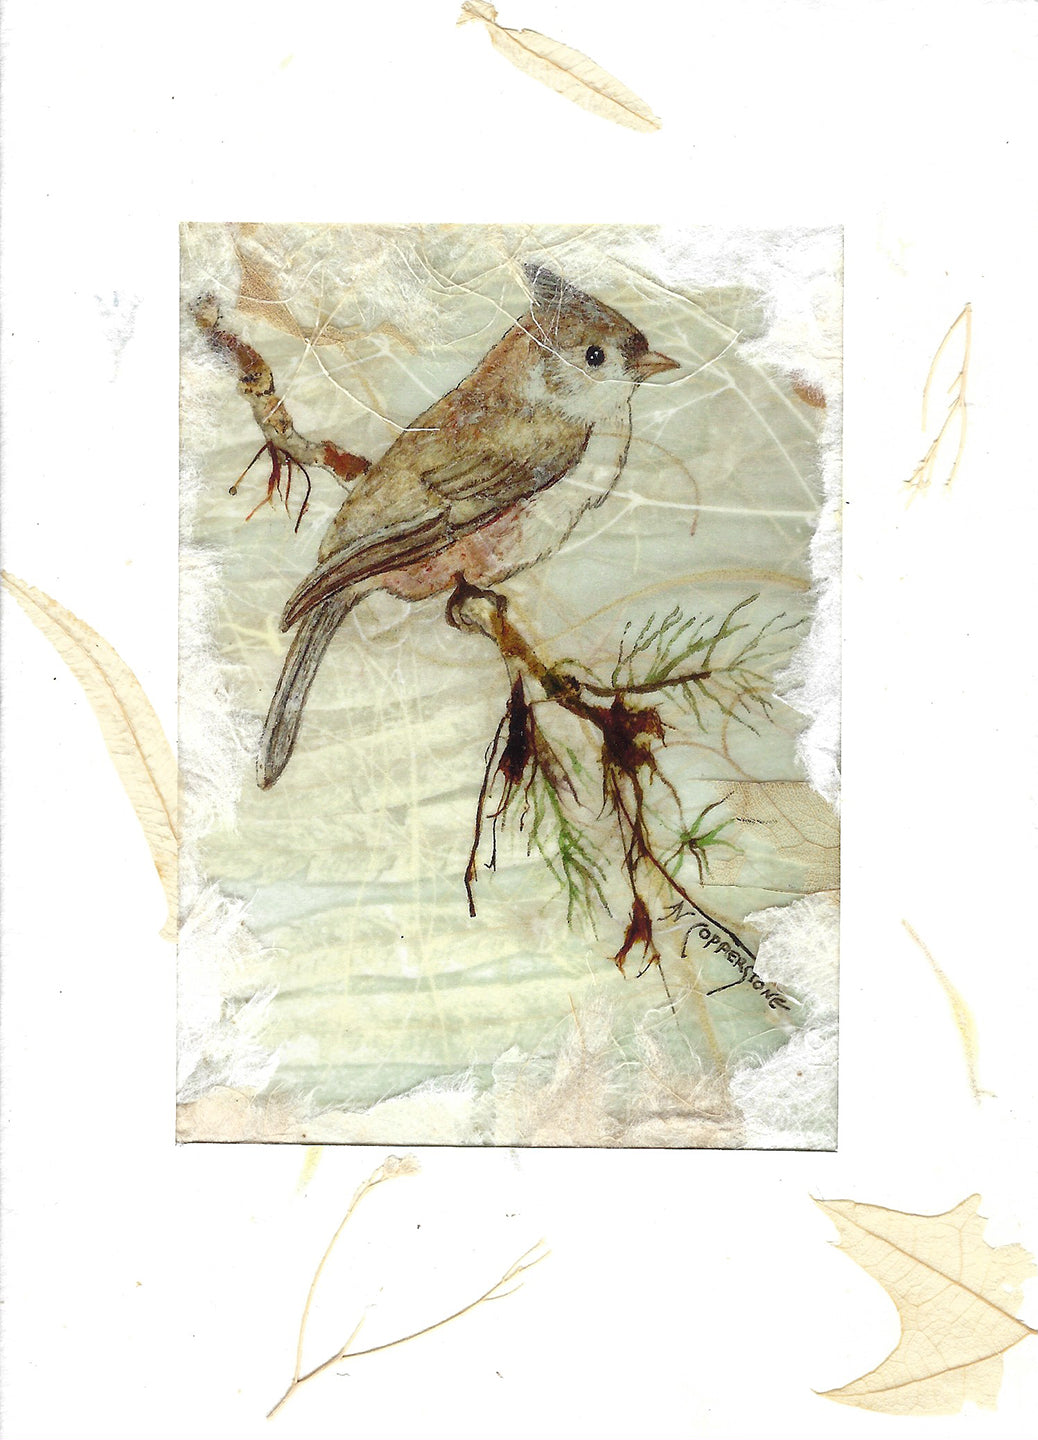 Titmouse - Mixed media fine art print by Janice A. Copperstone of Milford, Mich. 